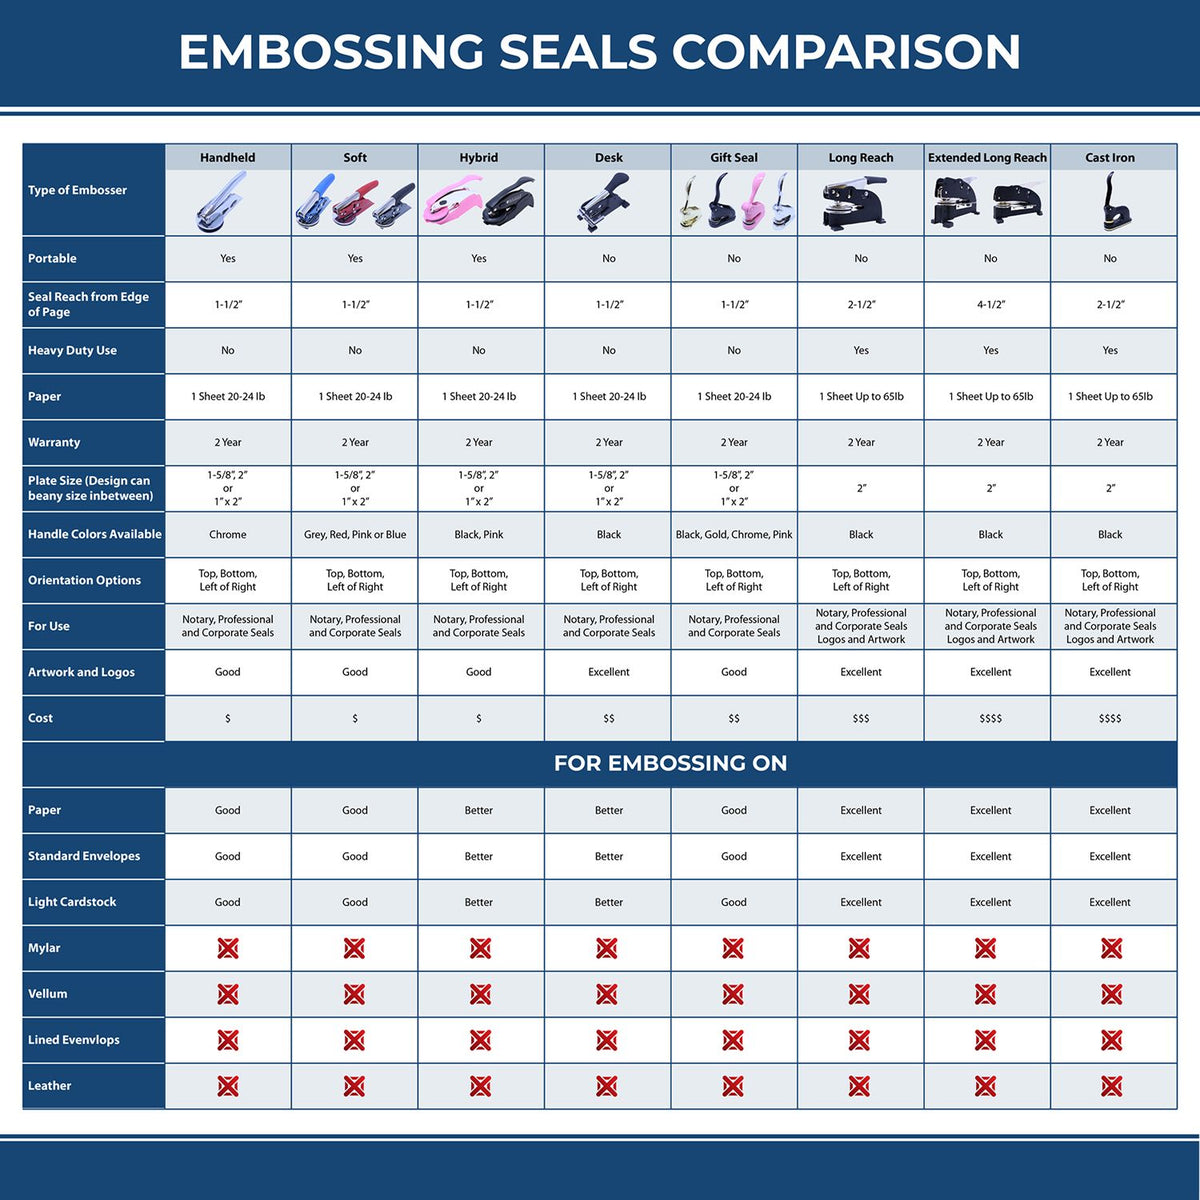 A comparison chart for the different types of mount models available for the Gift Missouri Geologist Seal